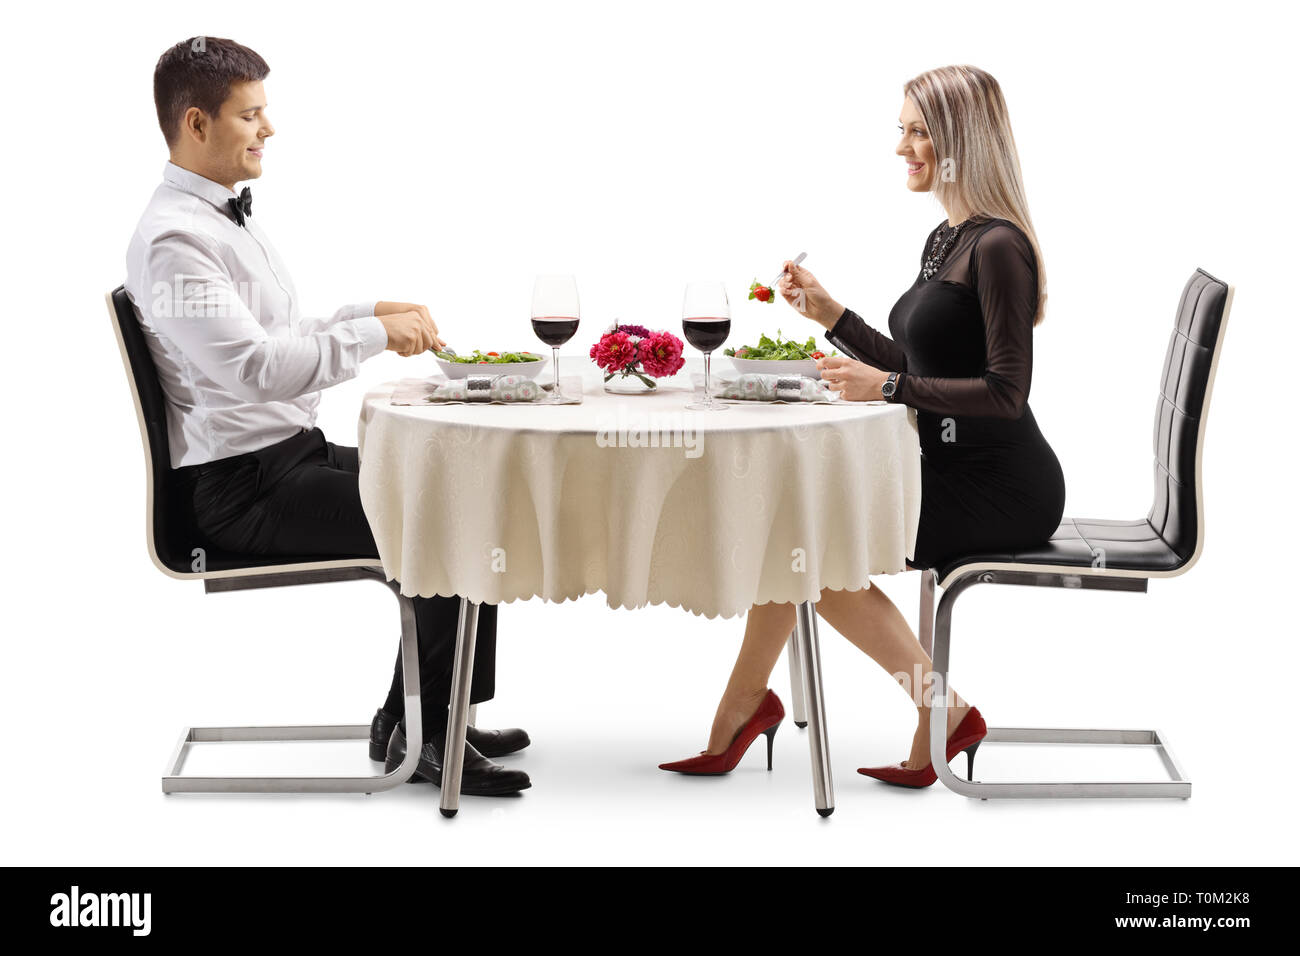 Full length profile shot of a young couple having salad and wine at a restaurant isolated on white background Stock Photo